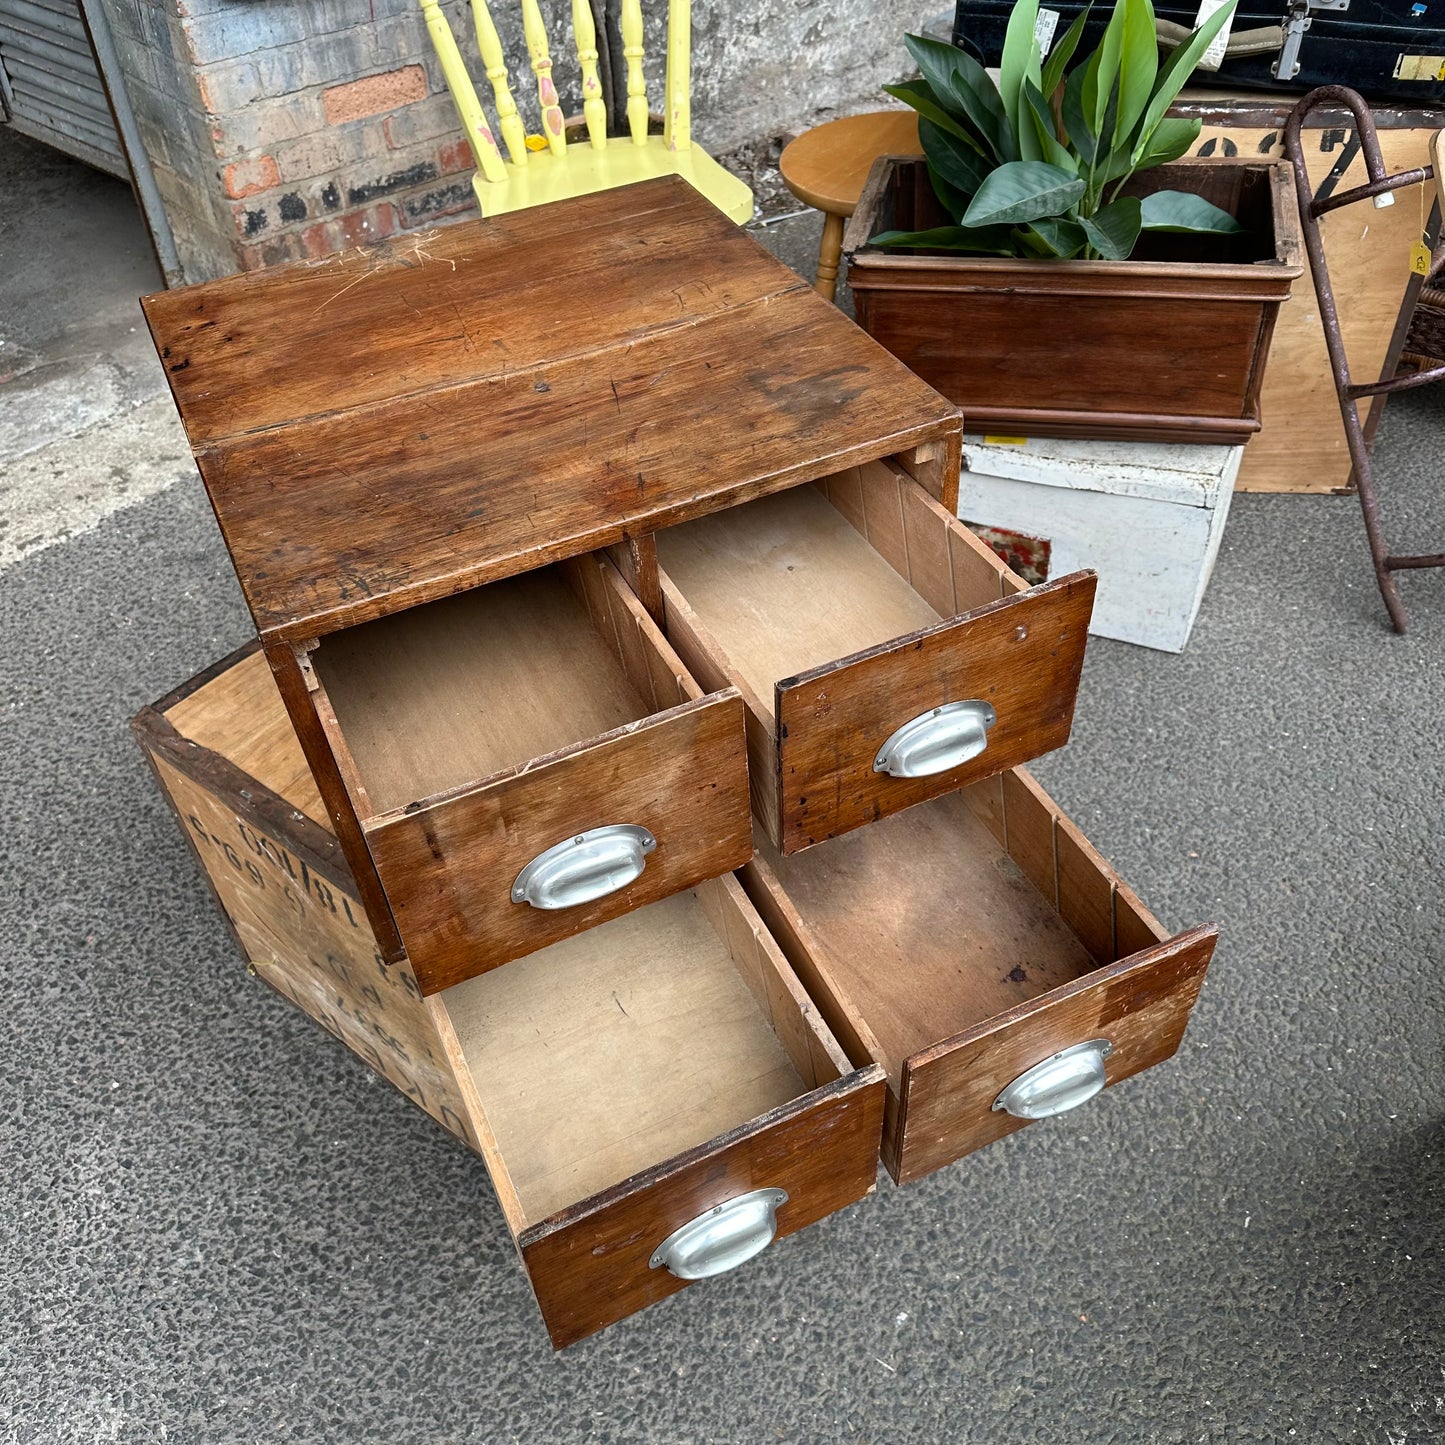 Antique Wooden Index/Apothecary Workshop Drawers